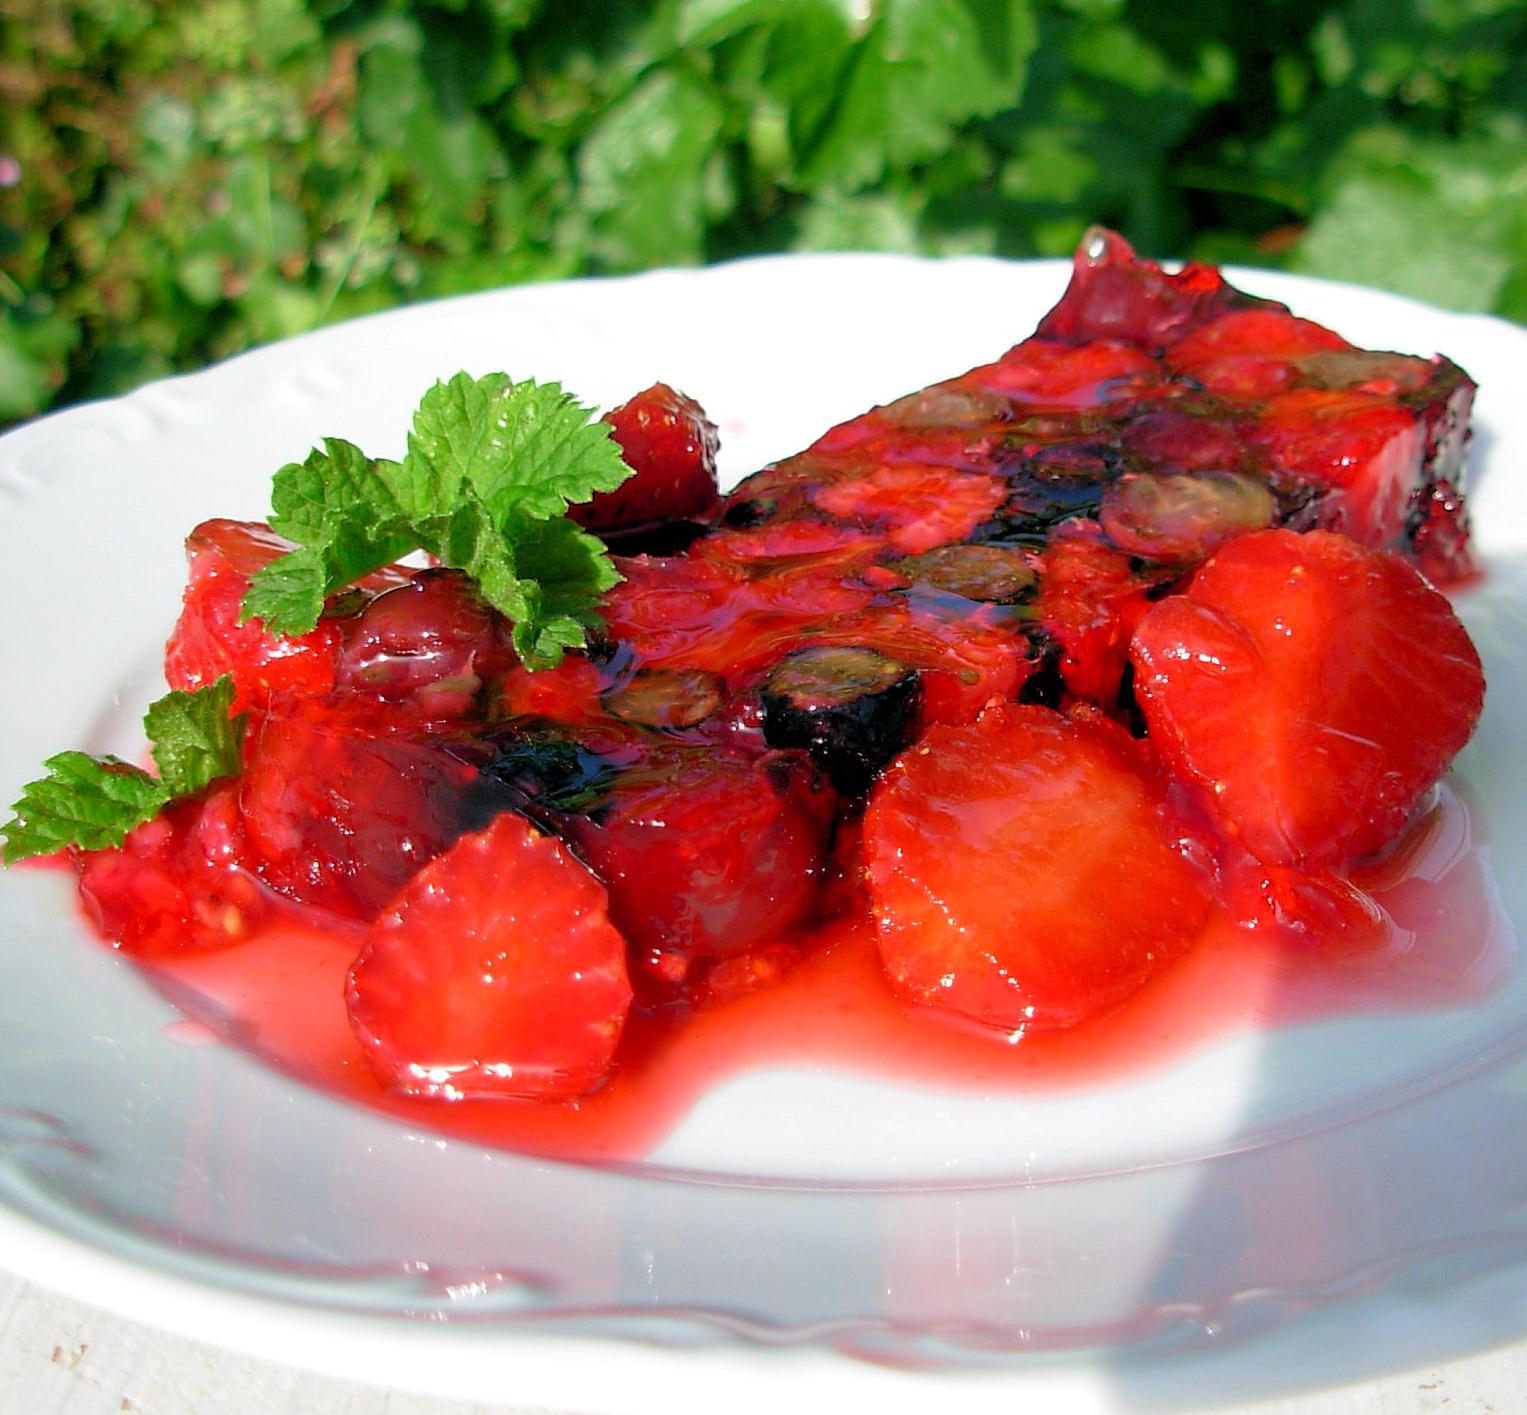  Summer's best fruit medley comes together in this stunning jelly terrine